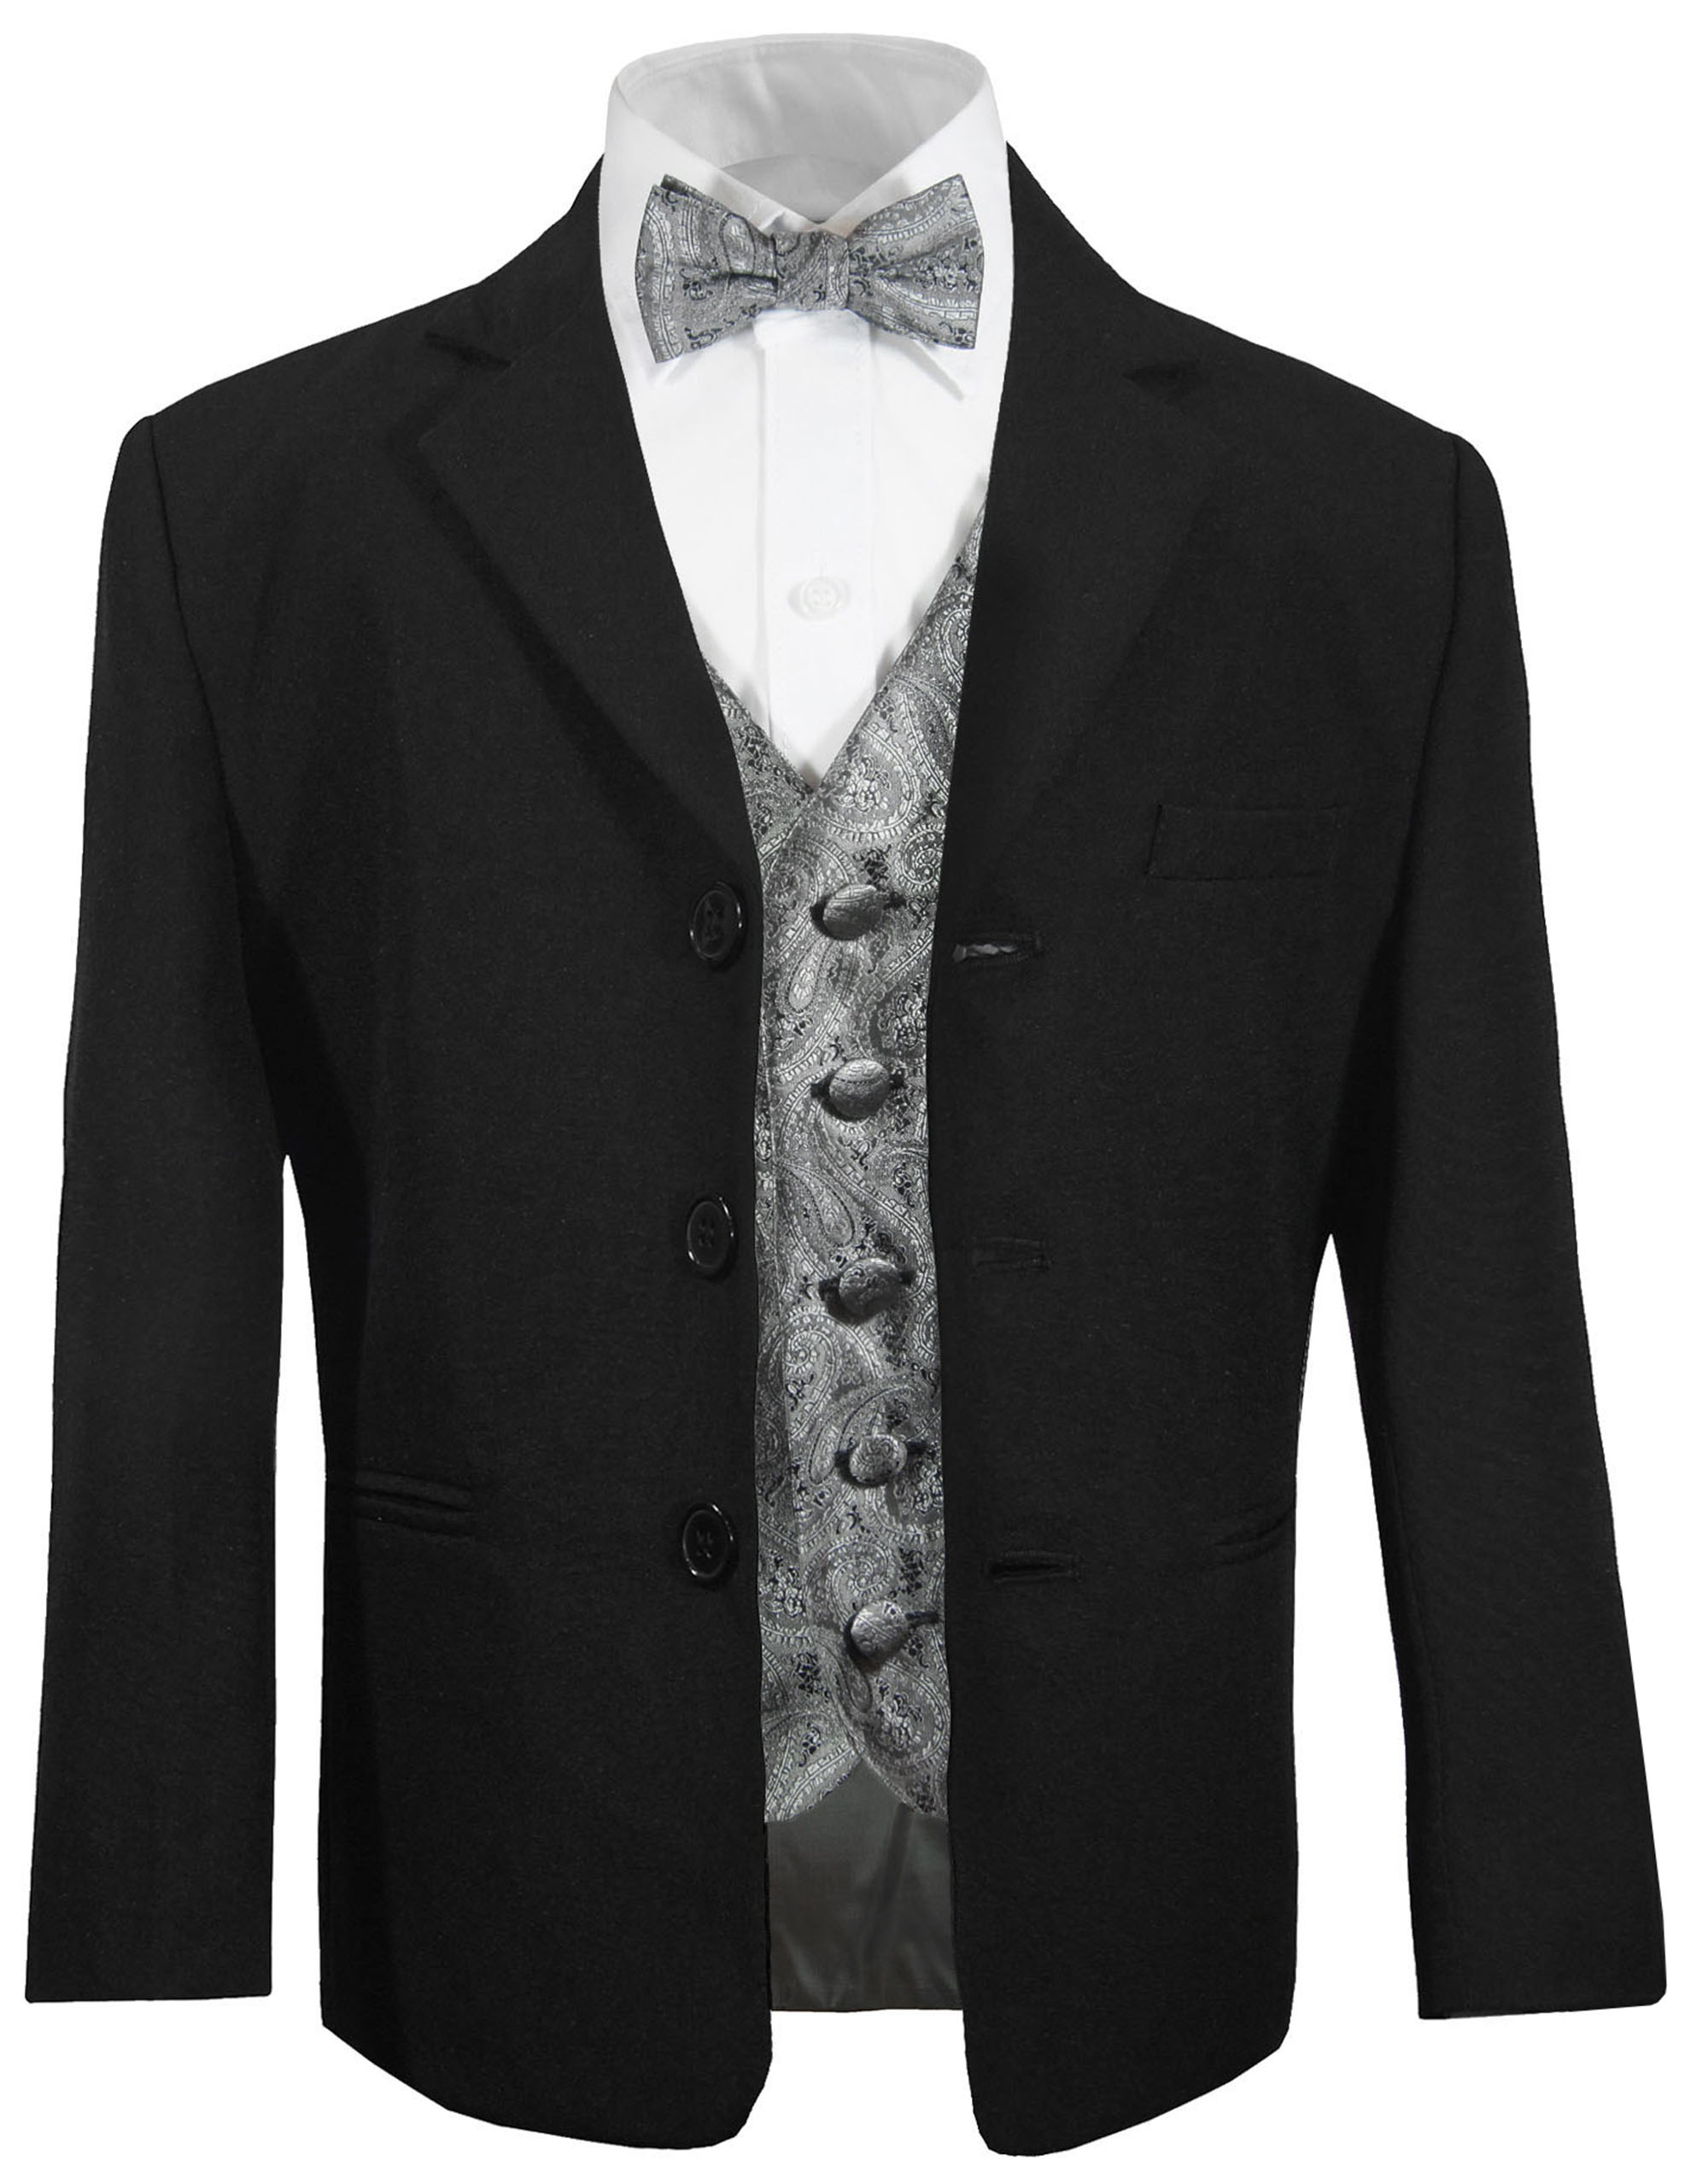 D1 Baby & BOY Formal Holiday Party Tuxedo Suit w/ Vest bow tie Black S-XL 2-20 